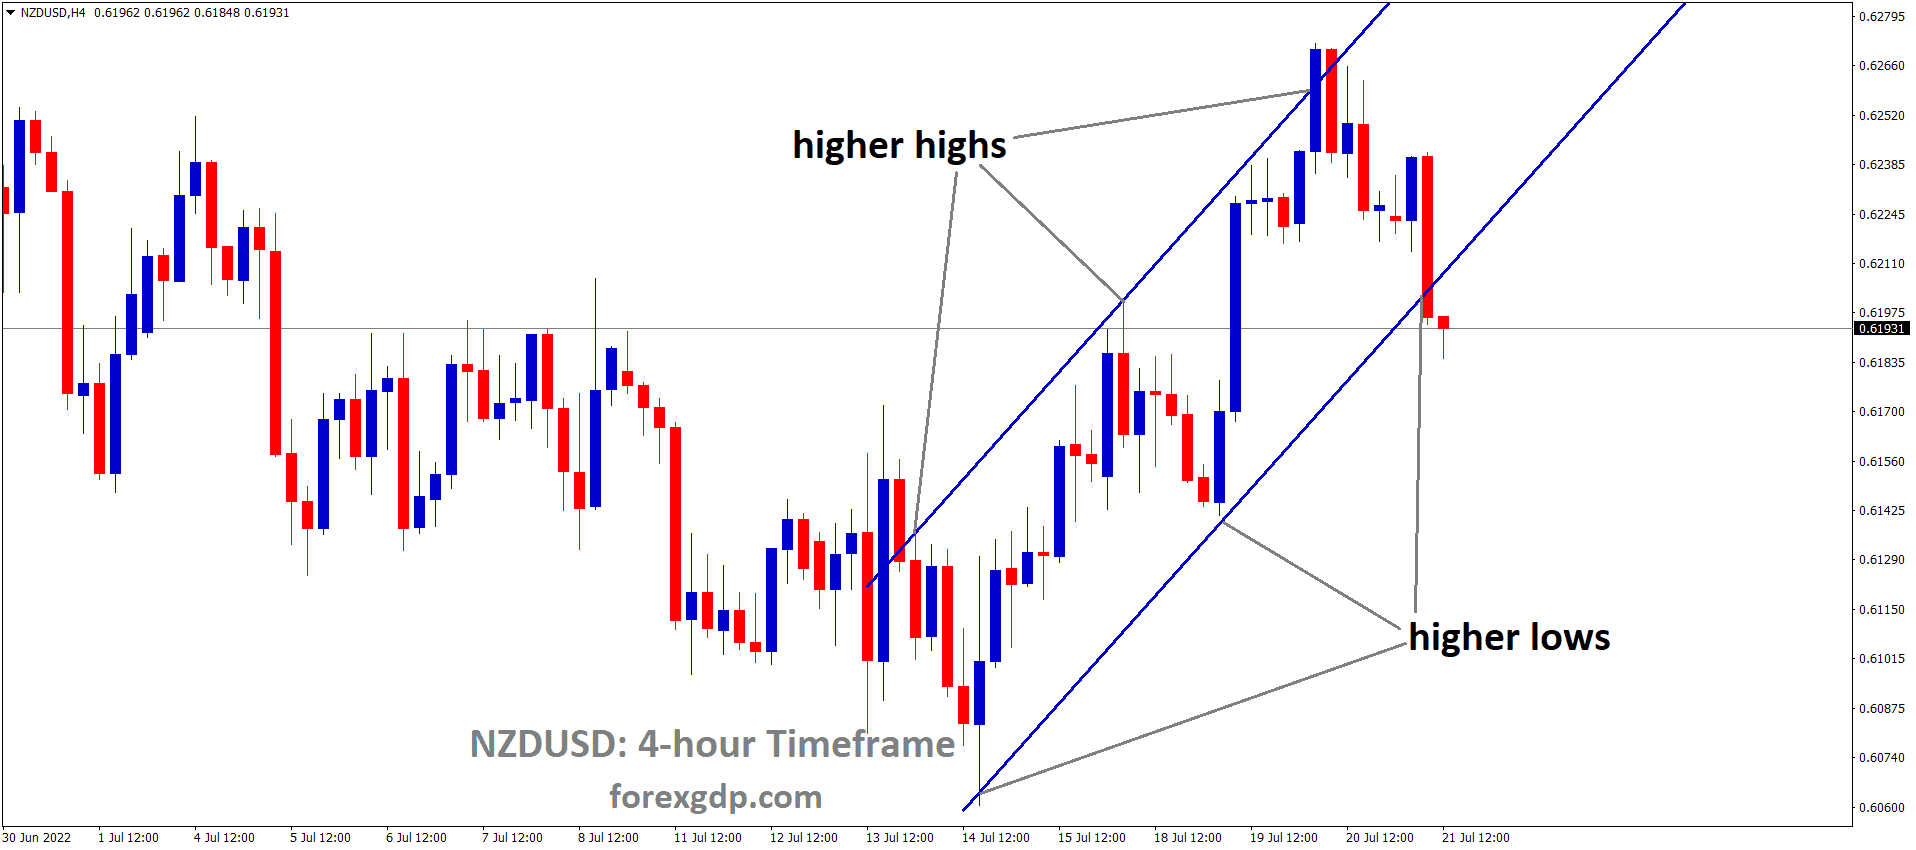 NZDUSD is moving in an Ascending channel and the Market has reached the higher low area of the channel 1